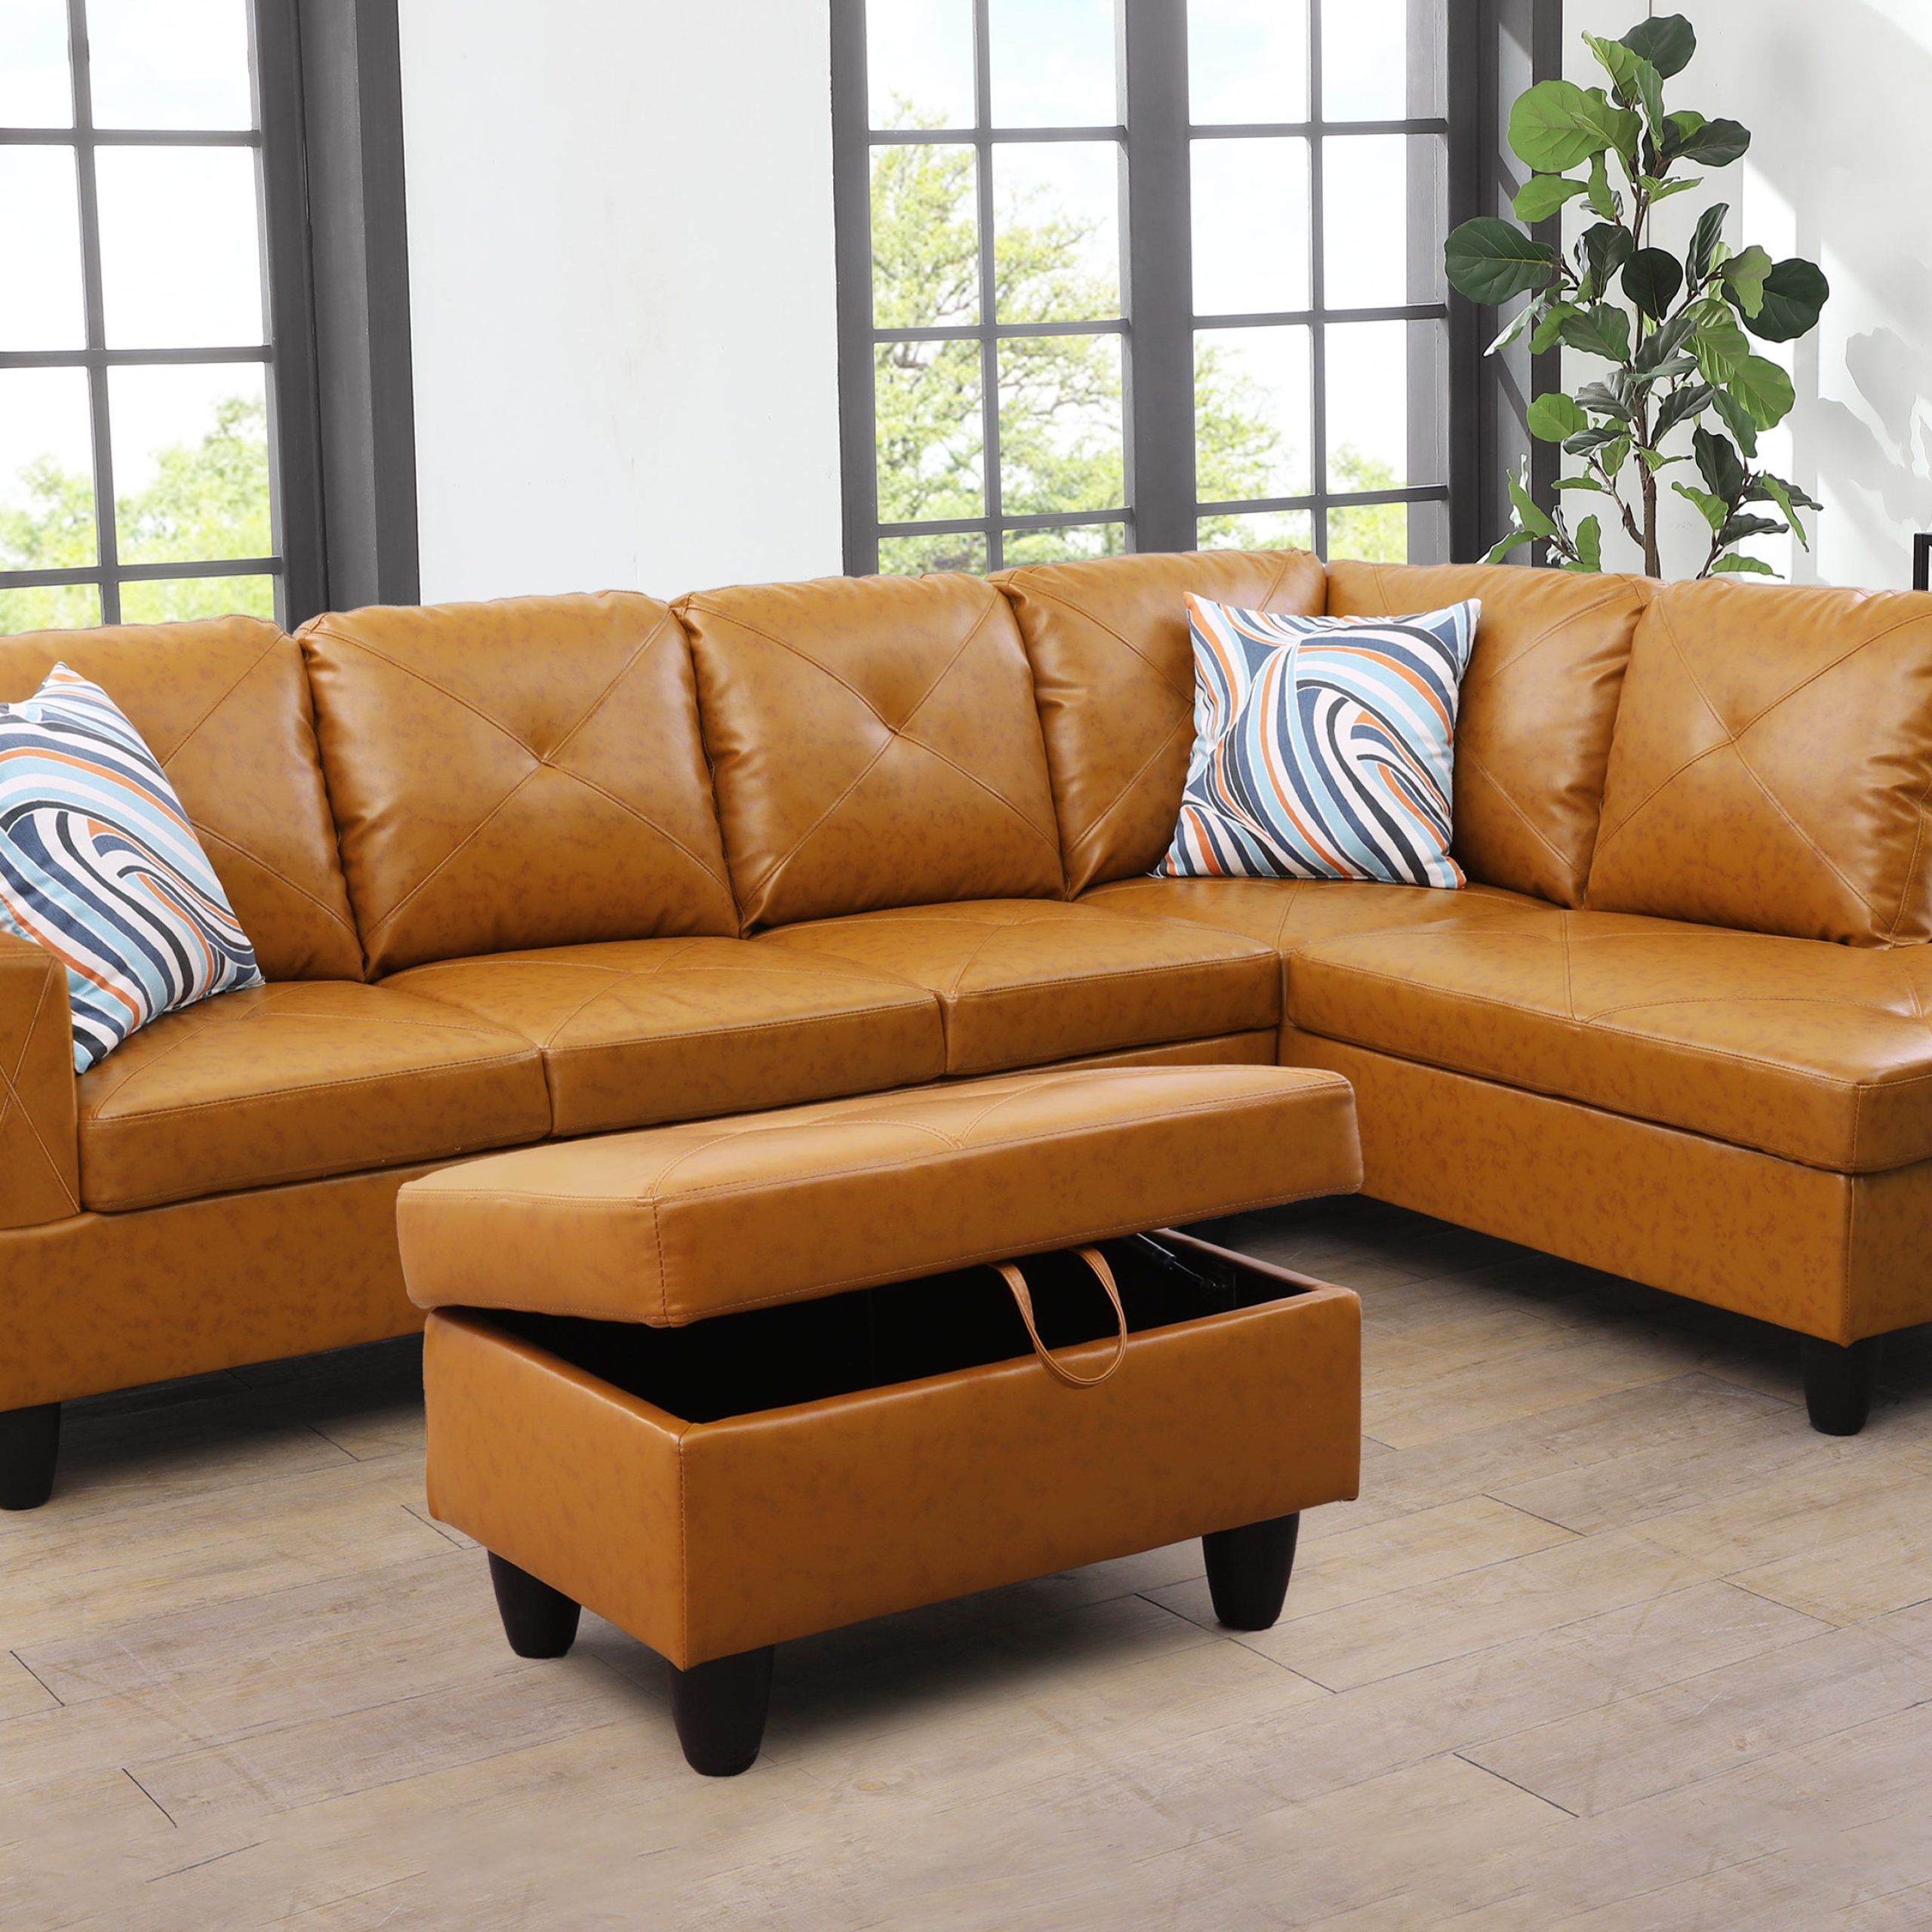 Ebern Designs 3 – Piece Vegan Leather Sectional & Reviews | Wayfair Pertaining To Faux Leather Sectional Sofa Sets (View 7 of 15)